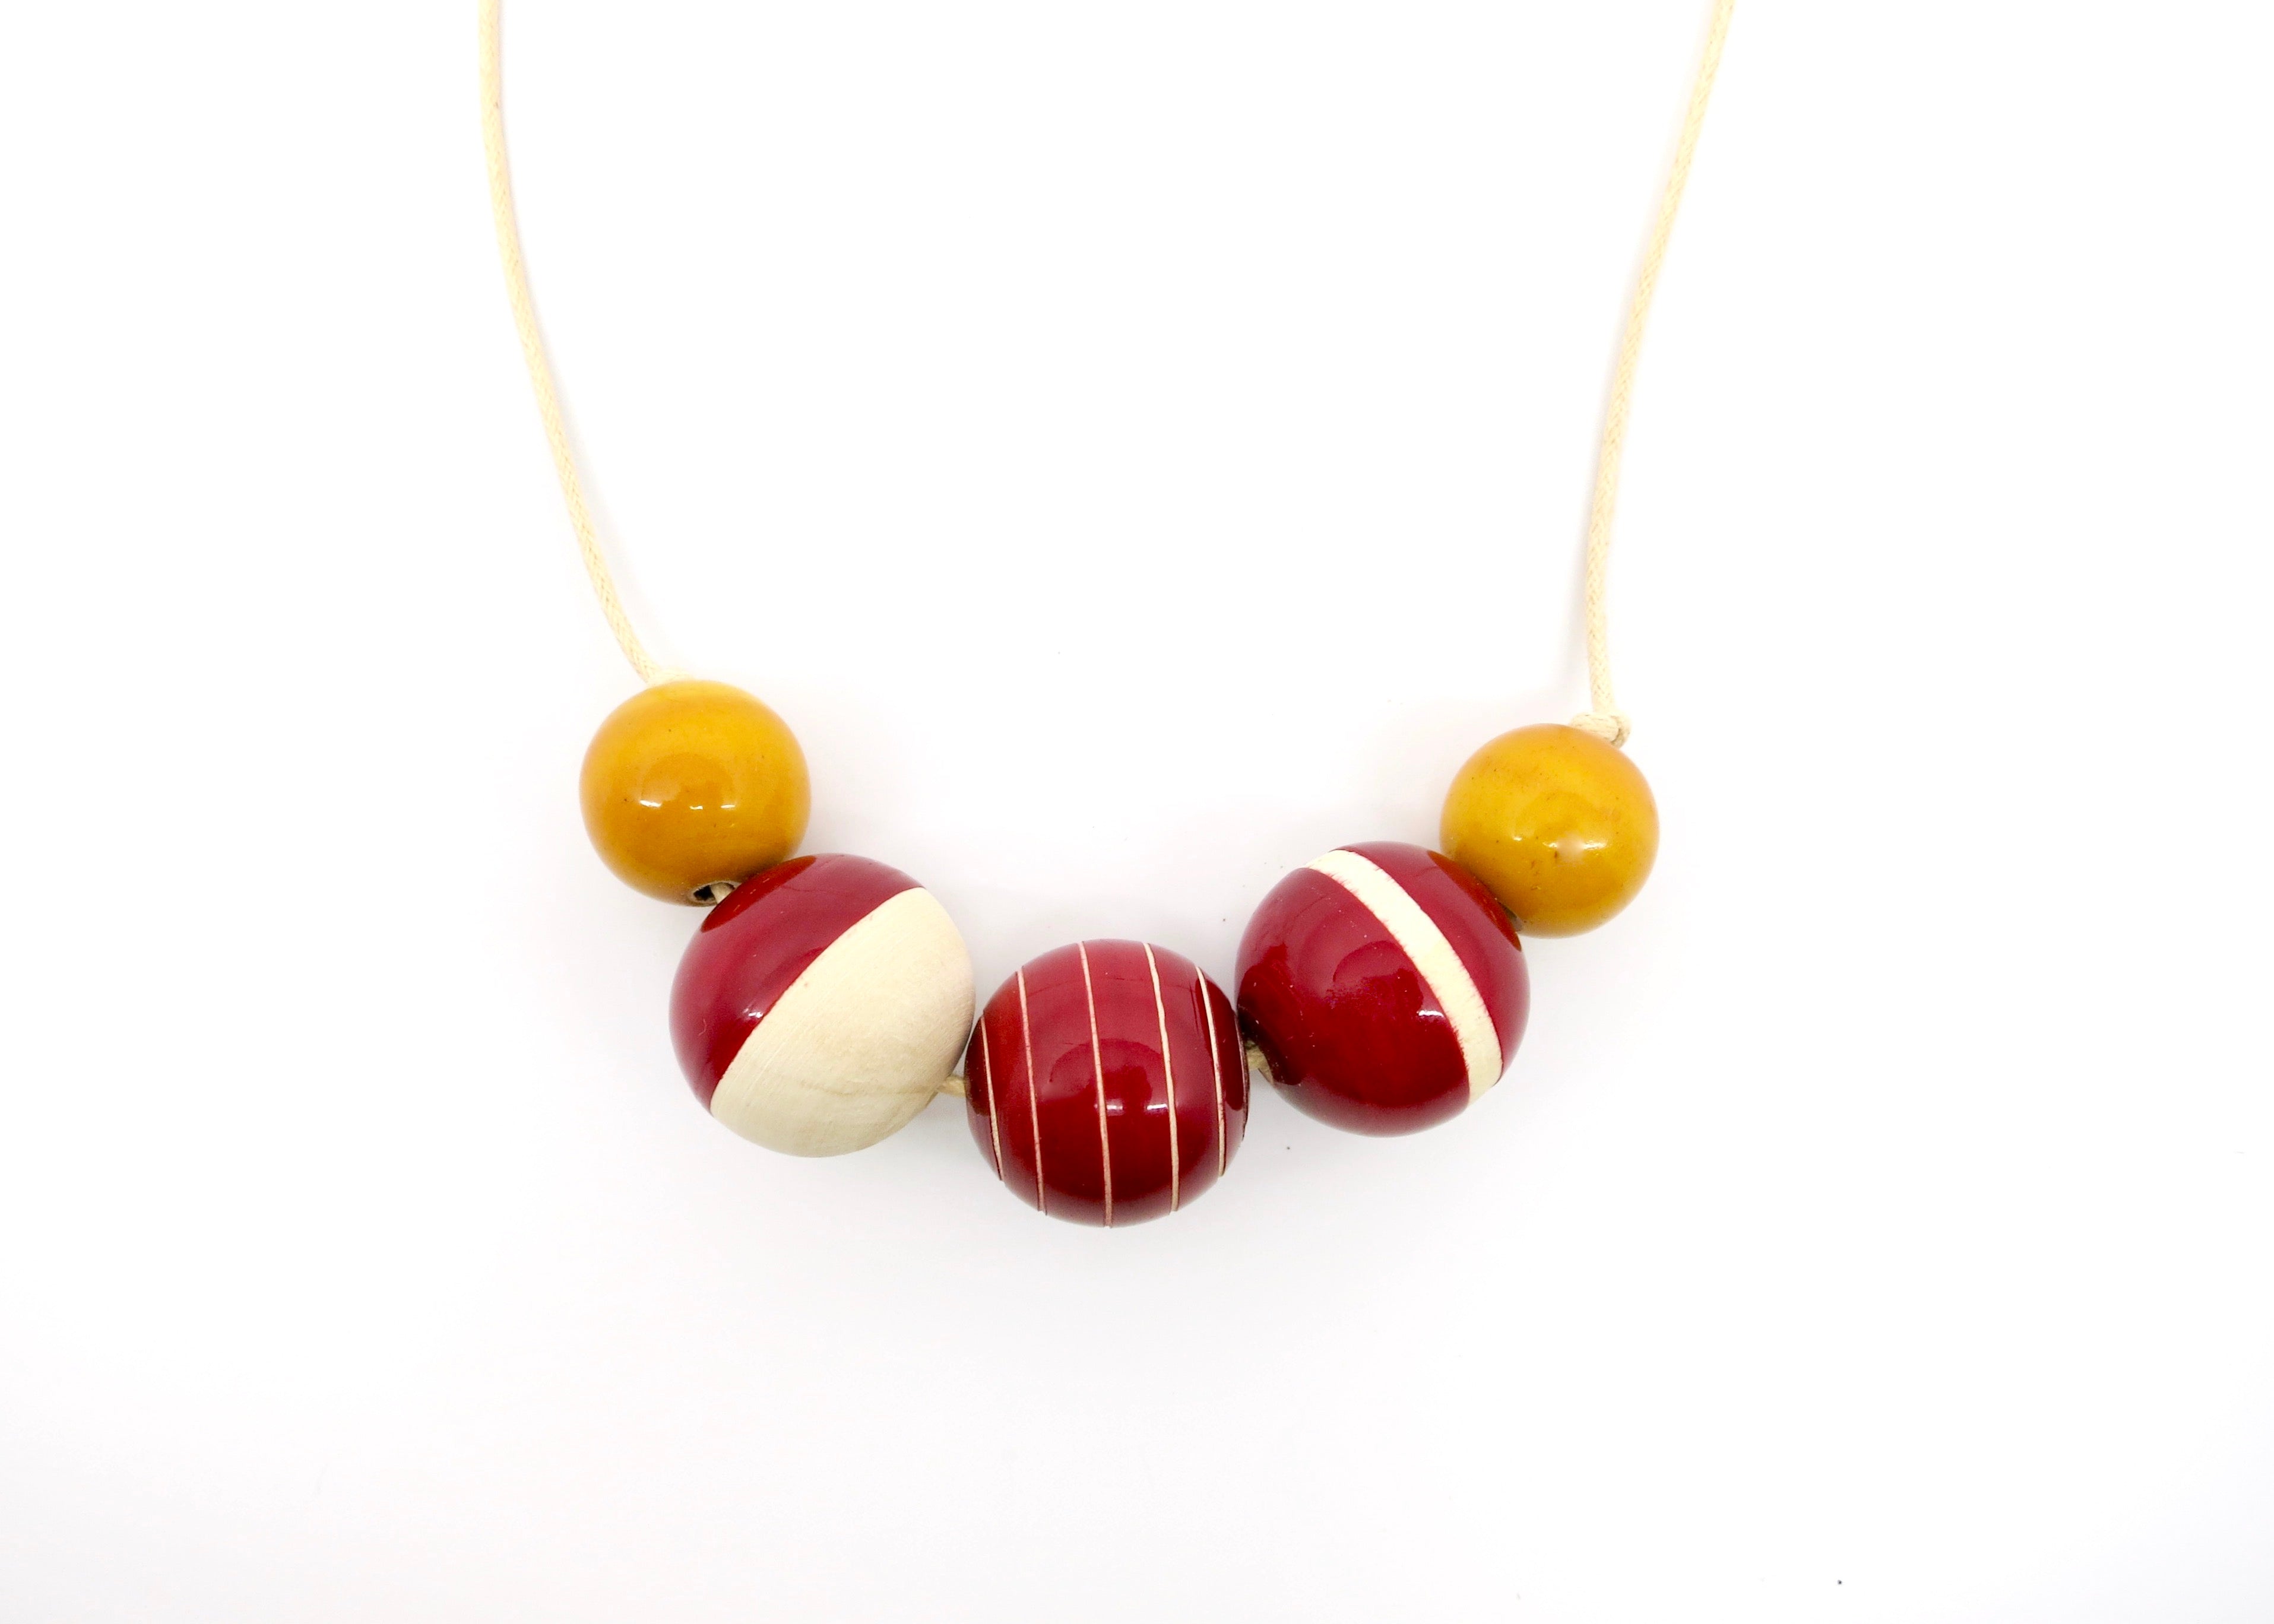 Parisian Chic Necklace (available in 4 different colors) - Craft Stories